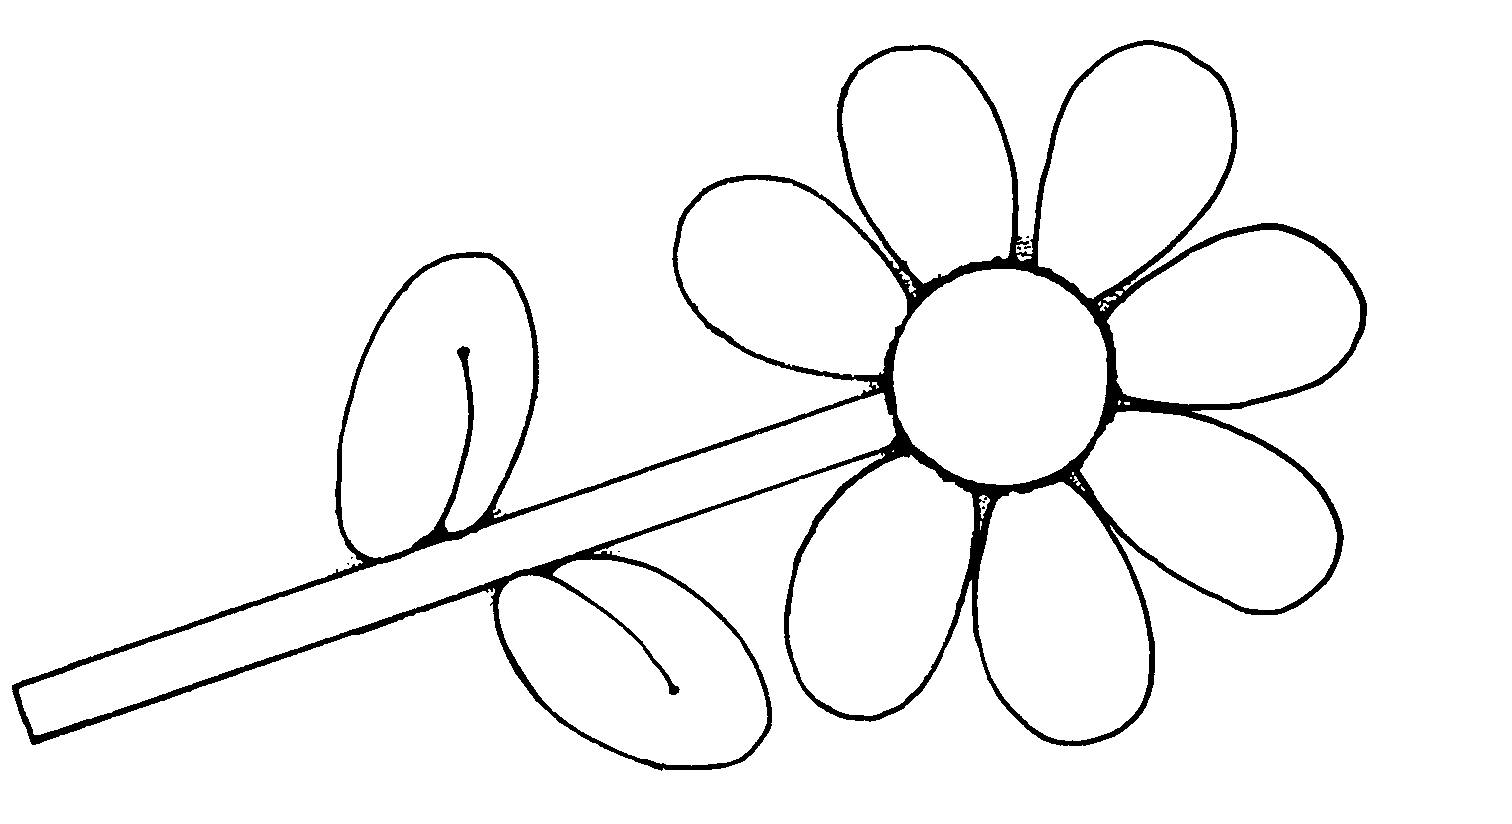 Clipart Spring Flowers Black And White - Free ...